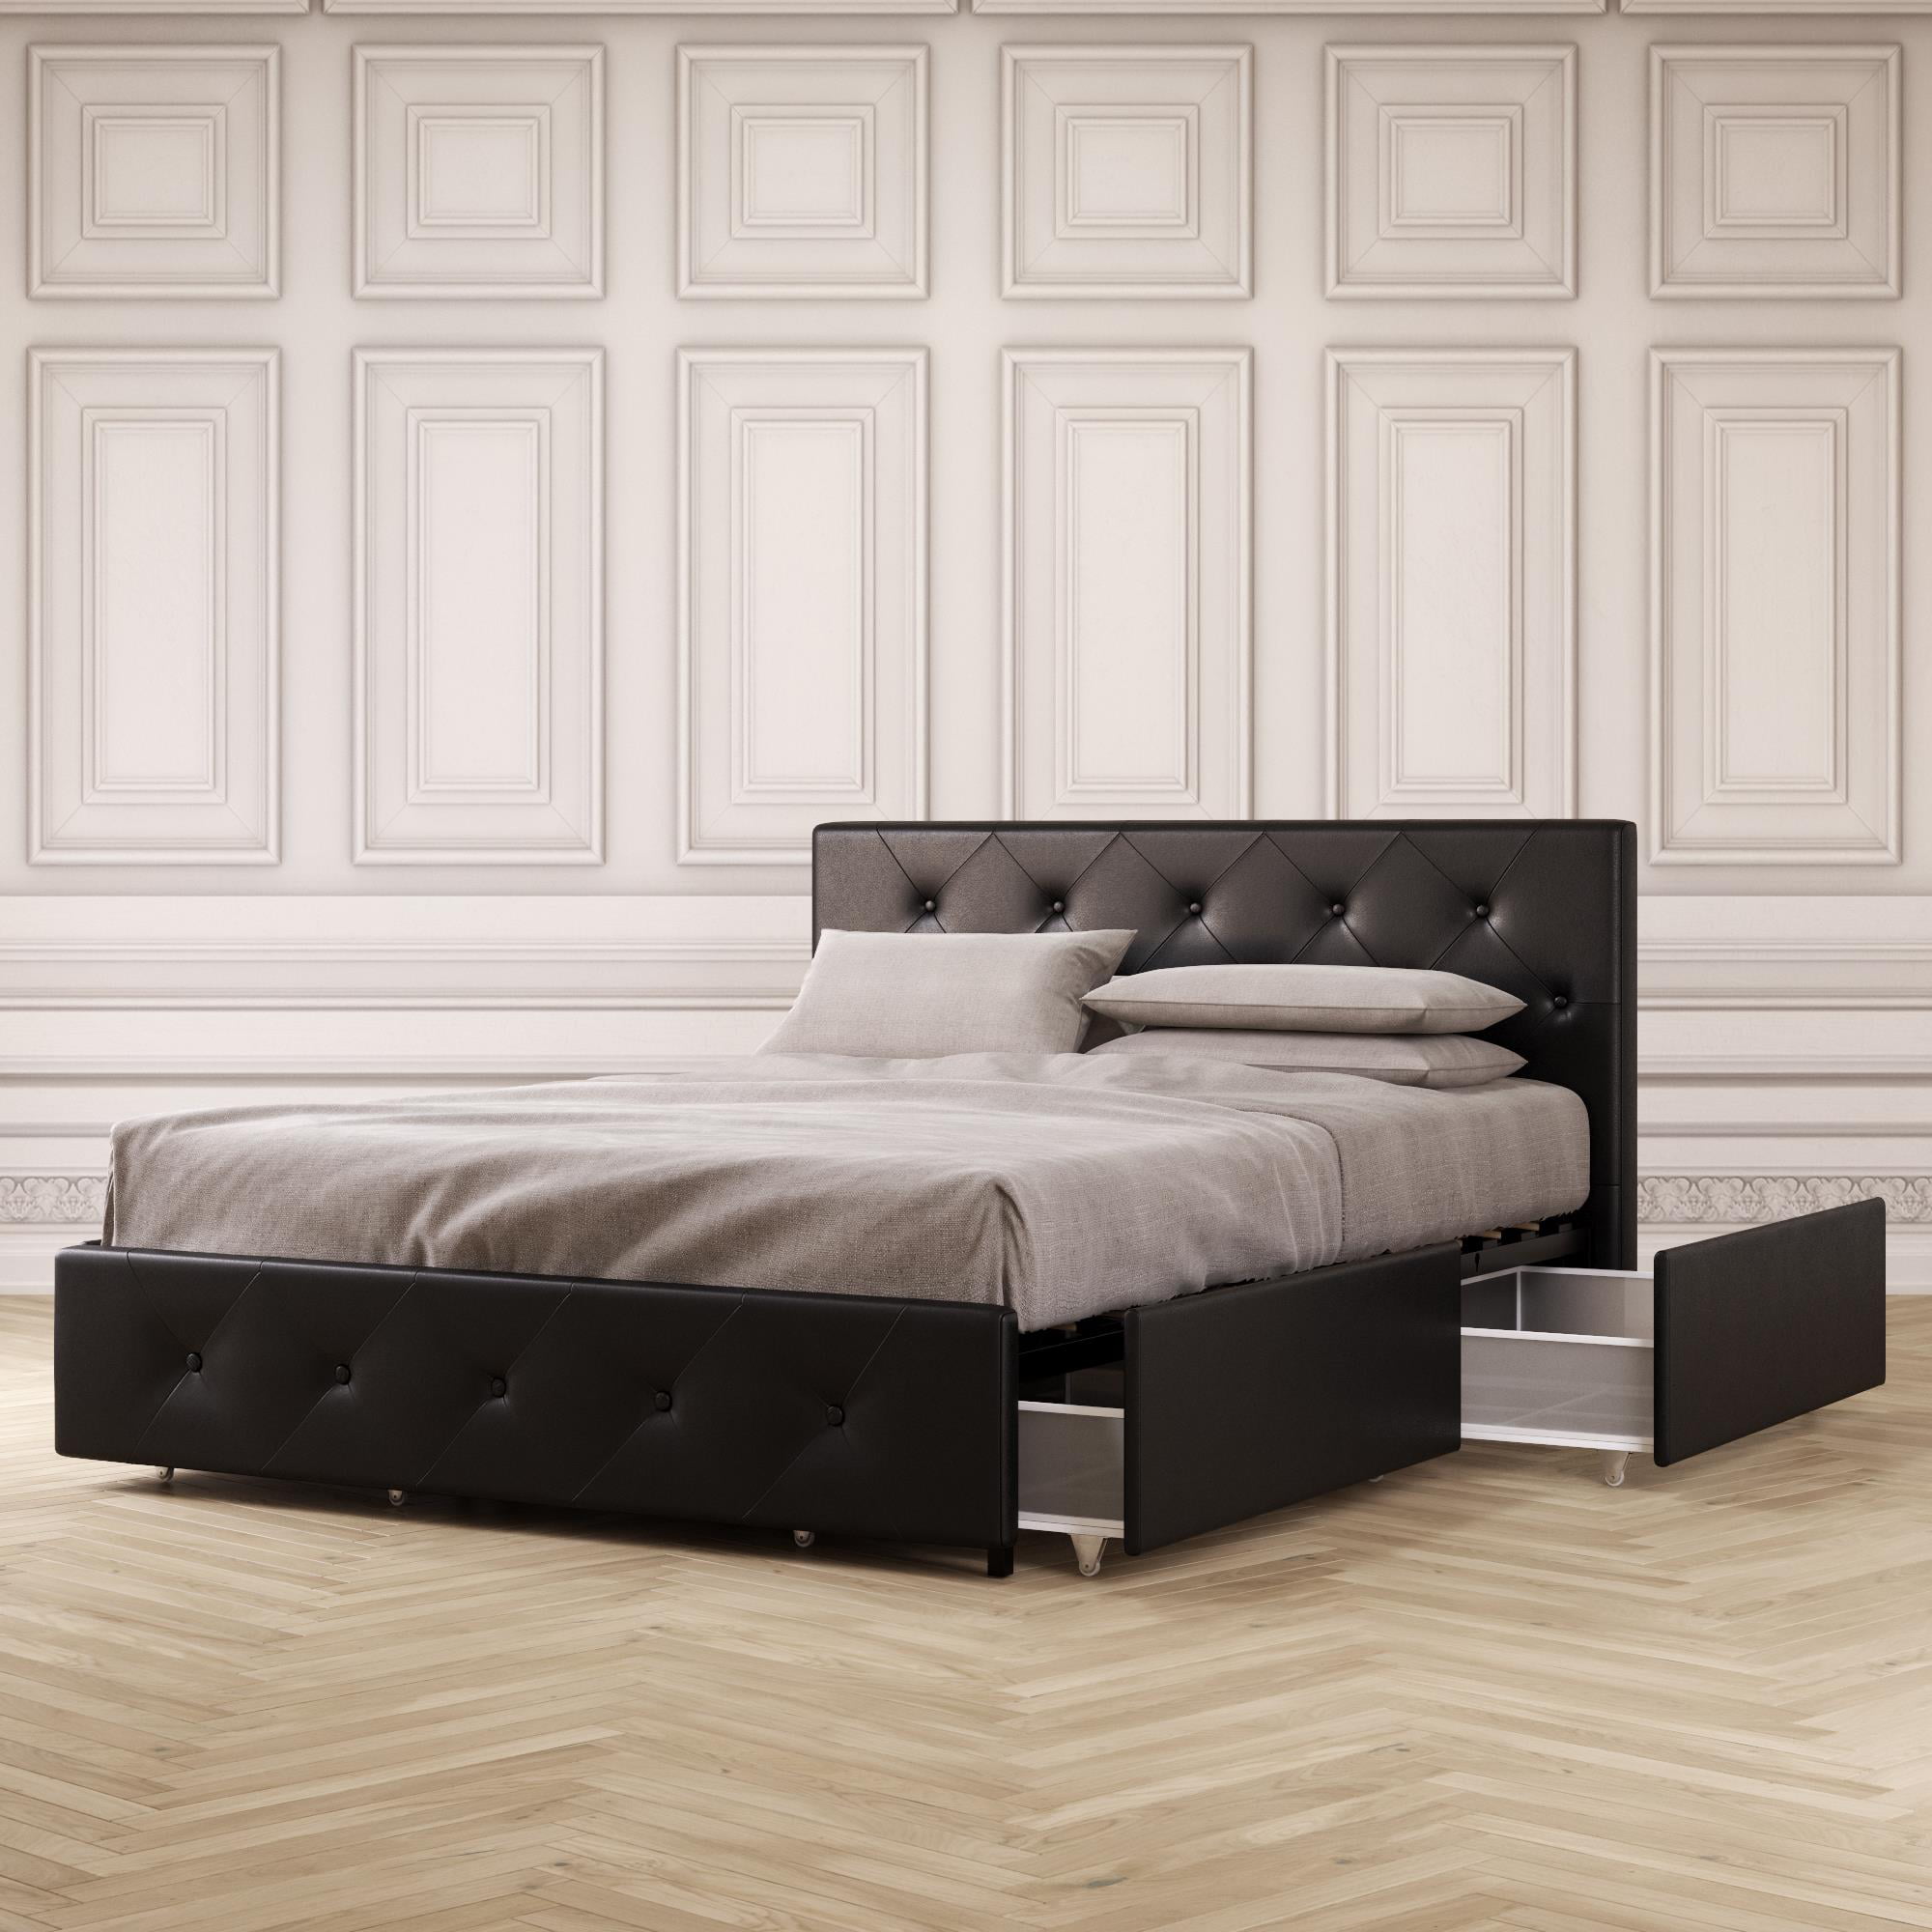 DHP Dean Upholstered Bed with Storage, Black Faux Leather, Queen 